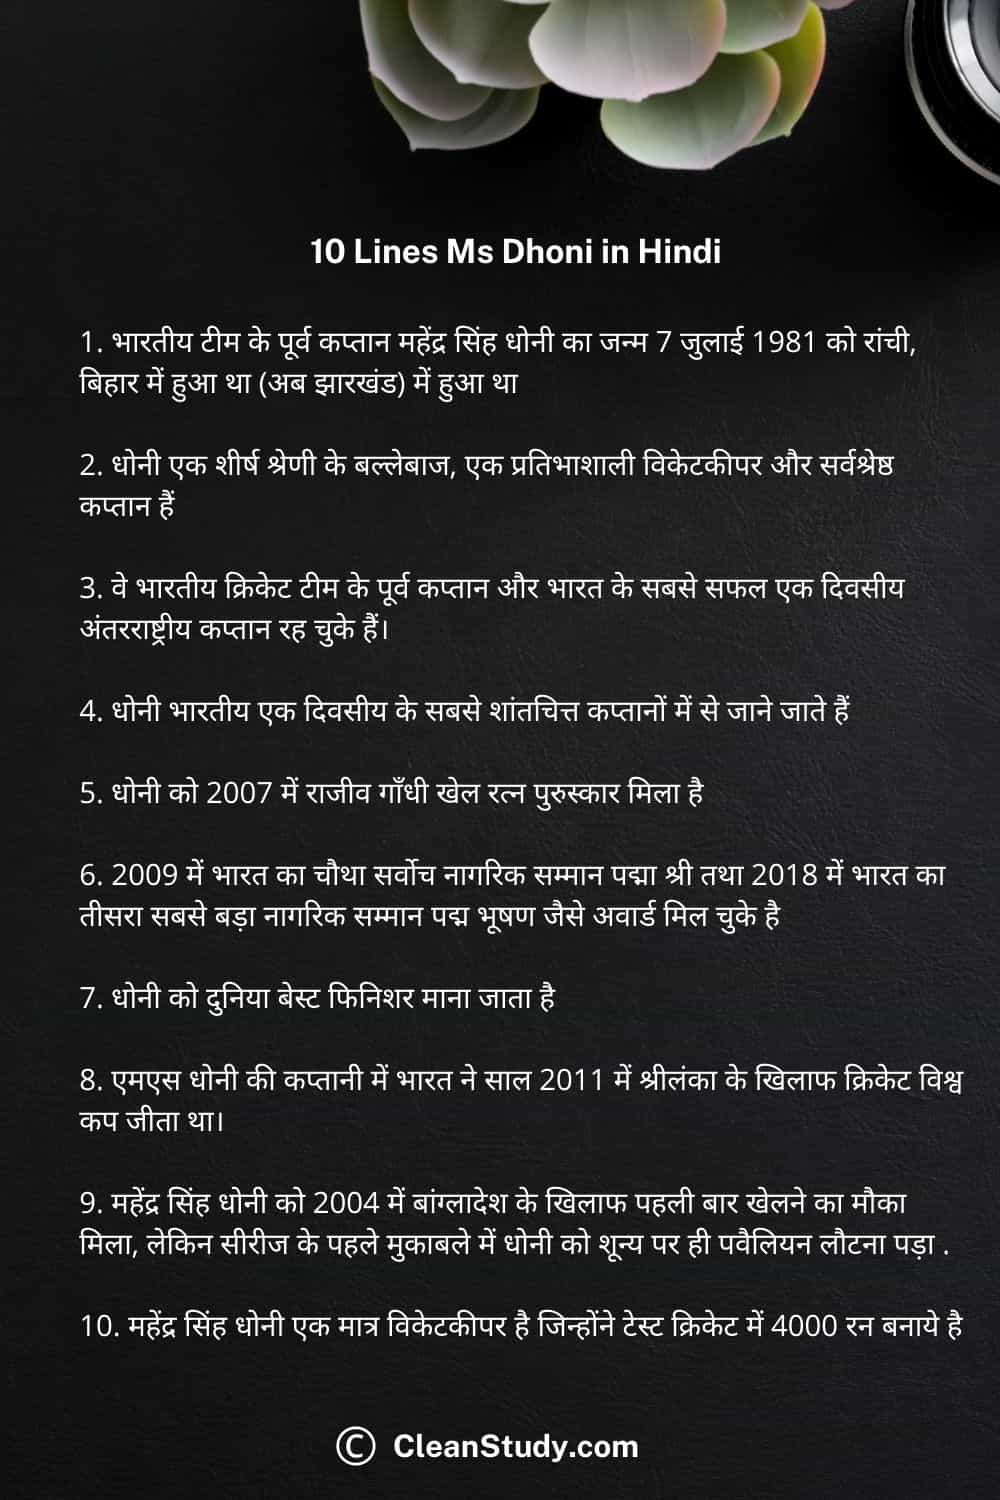 10 lines on ms dhoni in hindi